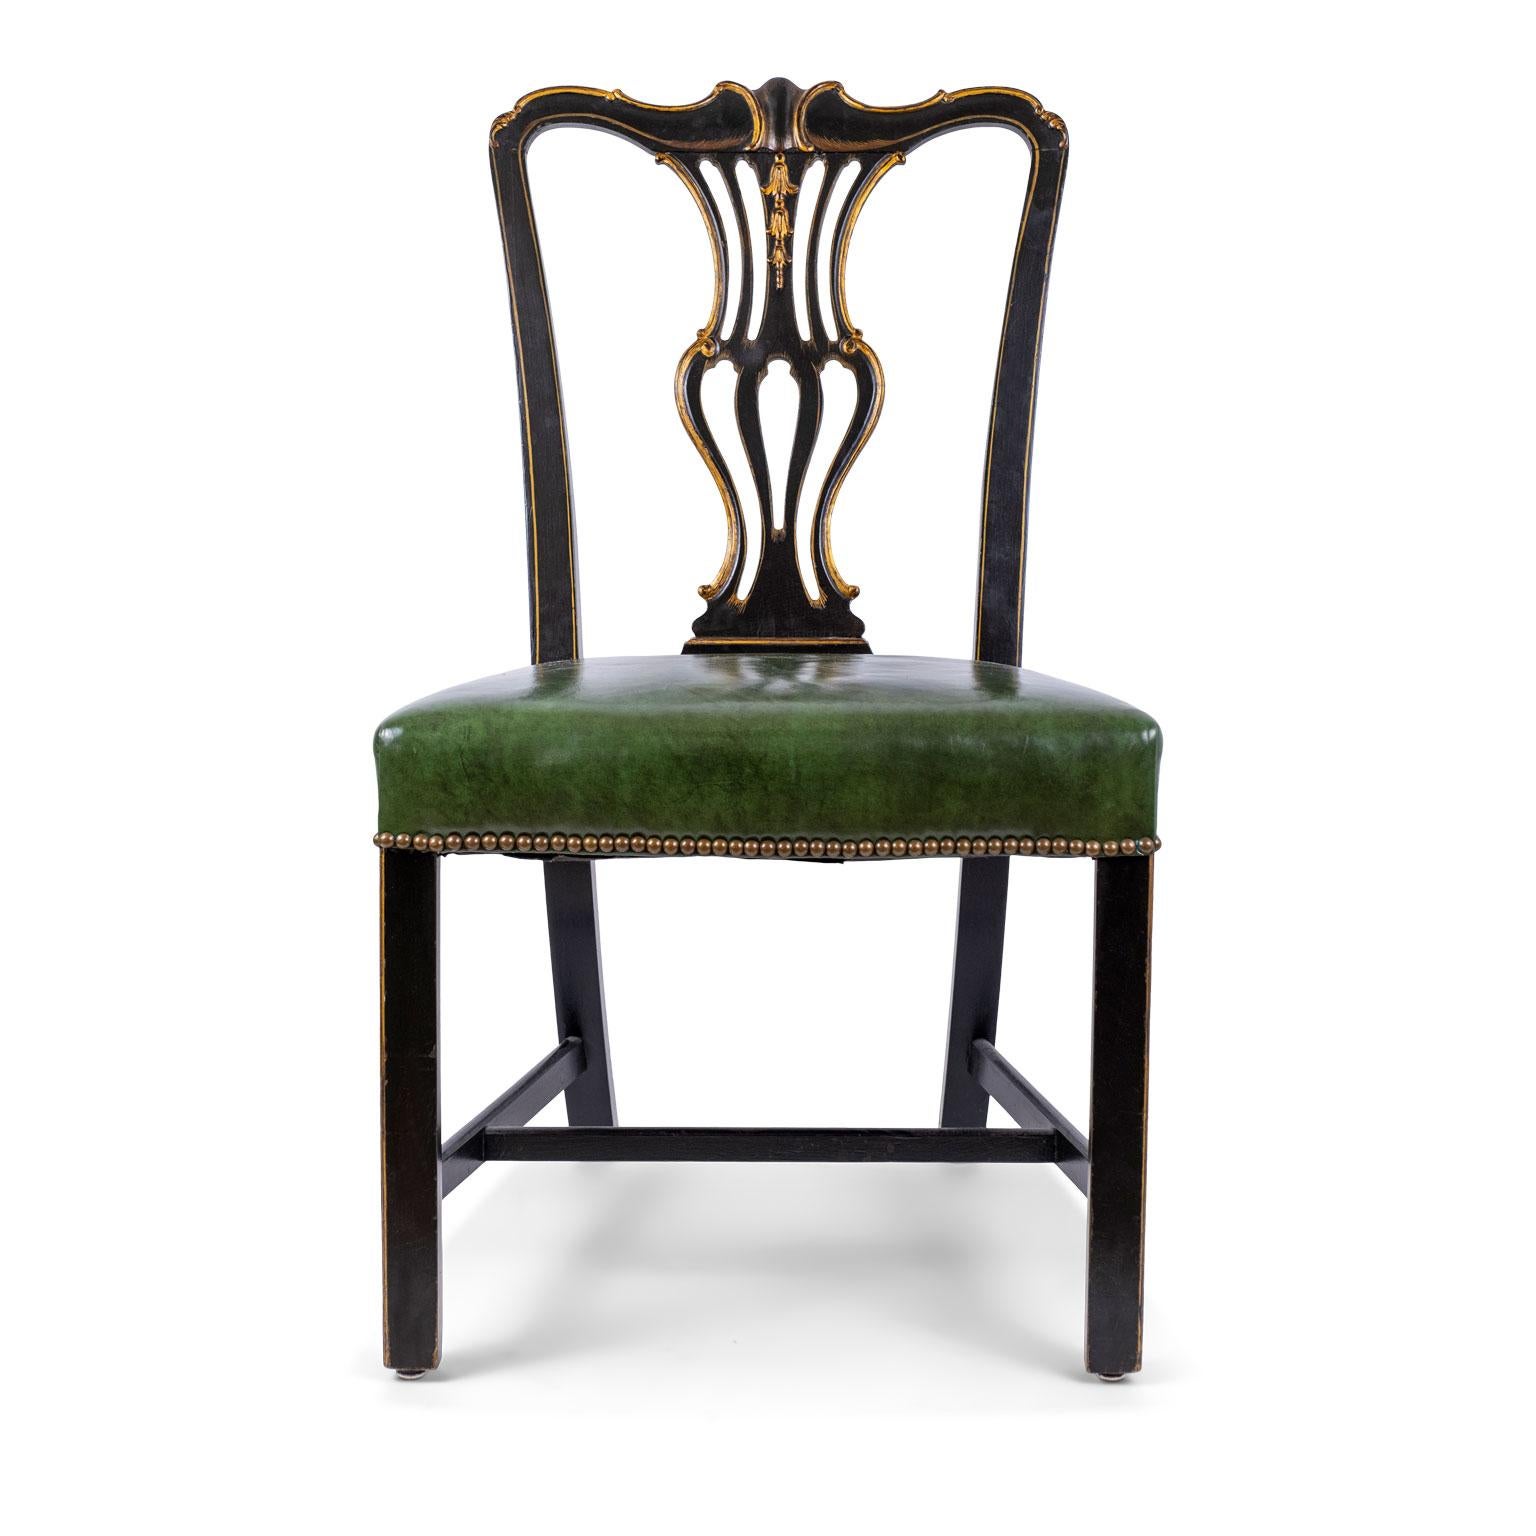 Ebonized and gilded Portuguese side chair carved in the 1980s. Covered in green-dyed leather and decorated with nailhead trim.

Note: Original/early finish on antique and vintage metal will include some, or all, of the following: patina, scaling,